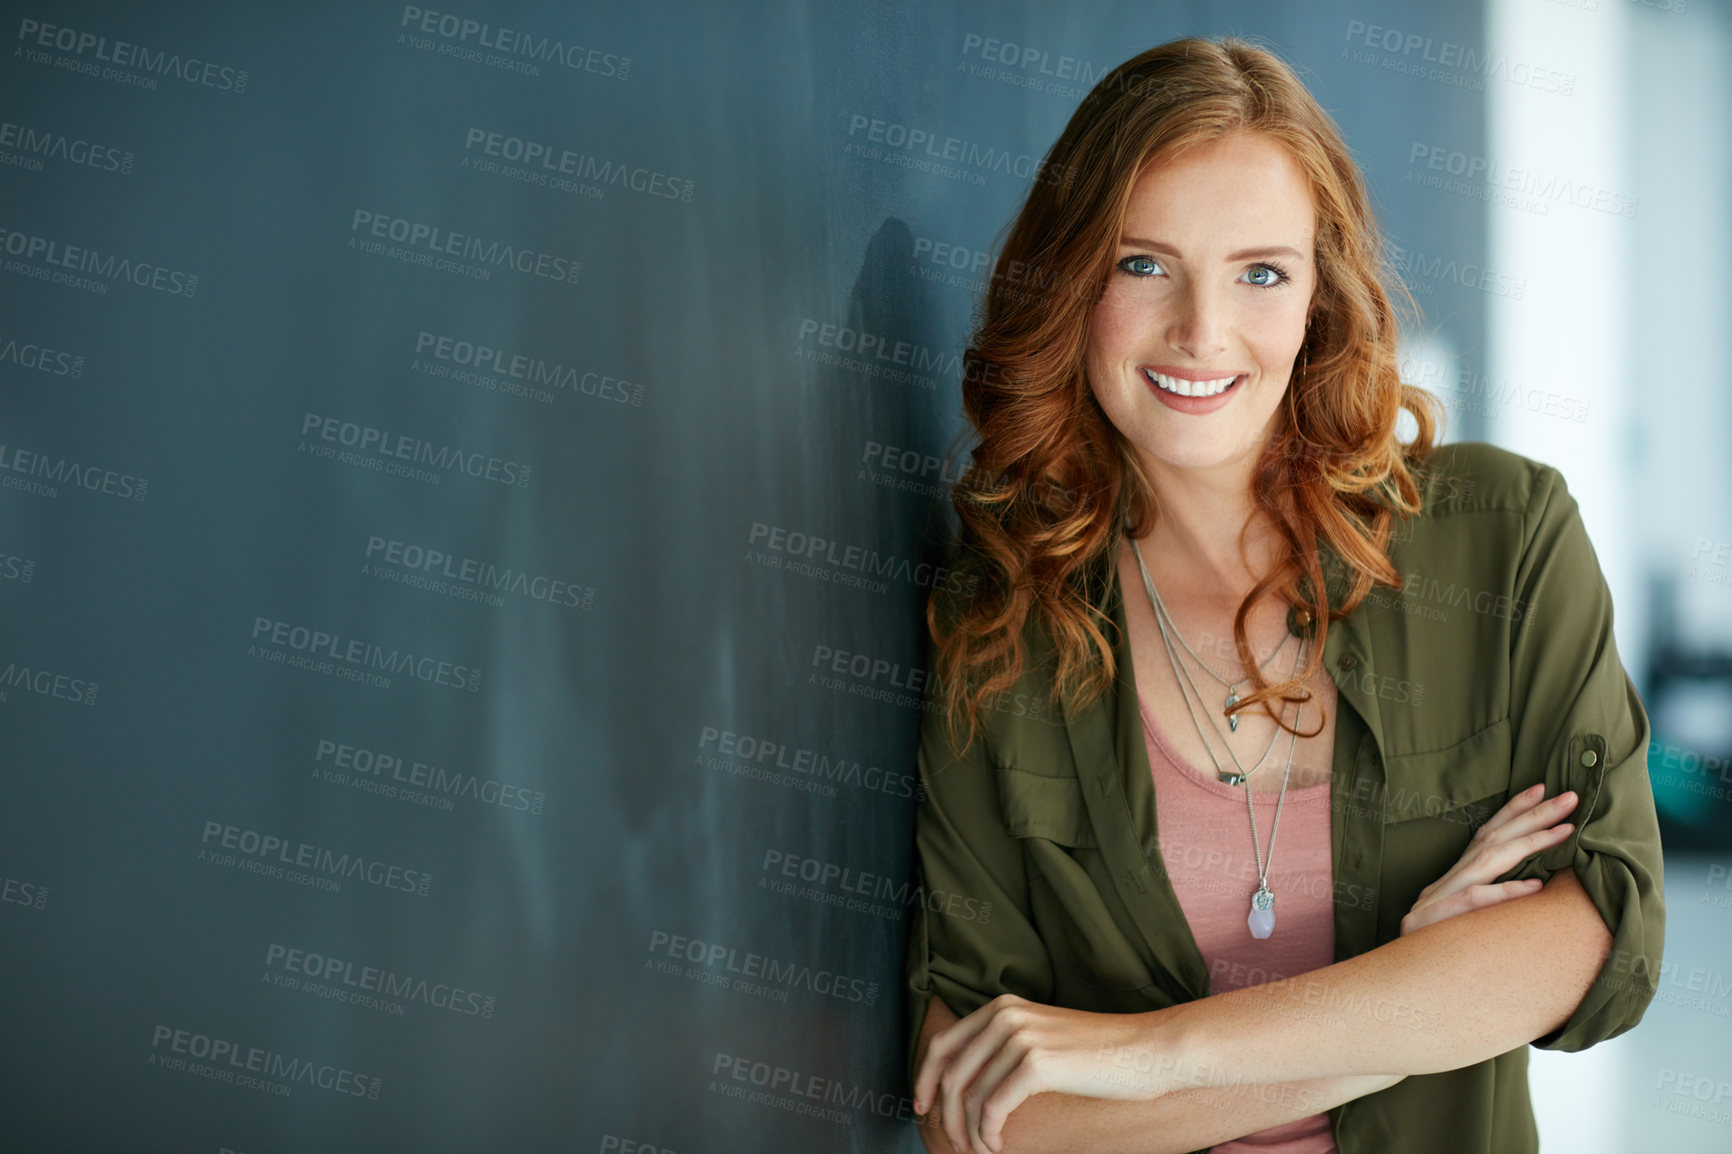 Buy stock photo Portrait of a confident young woman leaning against a blackboard